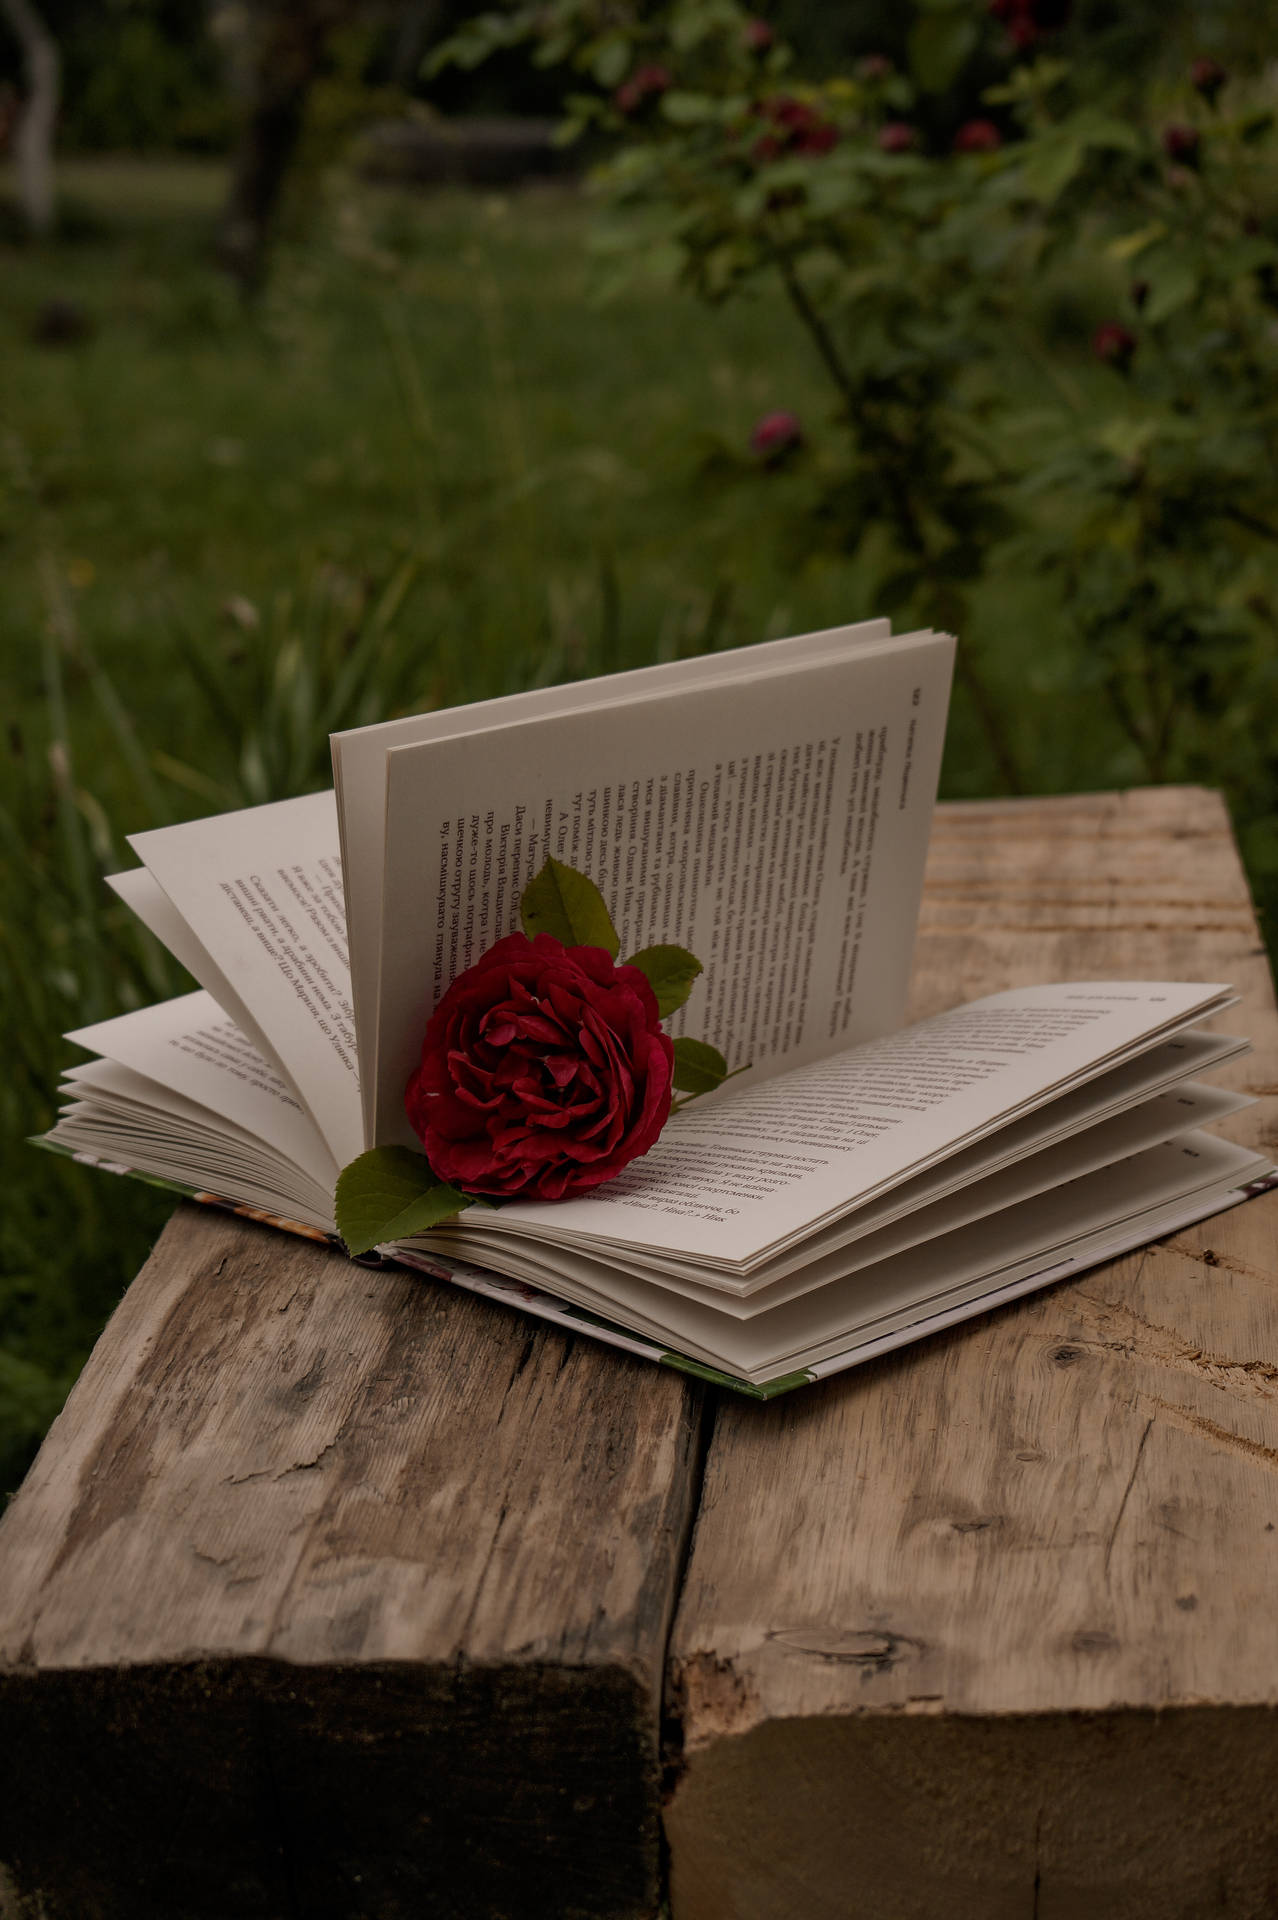 Reveal The Beauty Within: An Open Book With A Rose Sits On A Green Aesthetic Background. Background